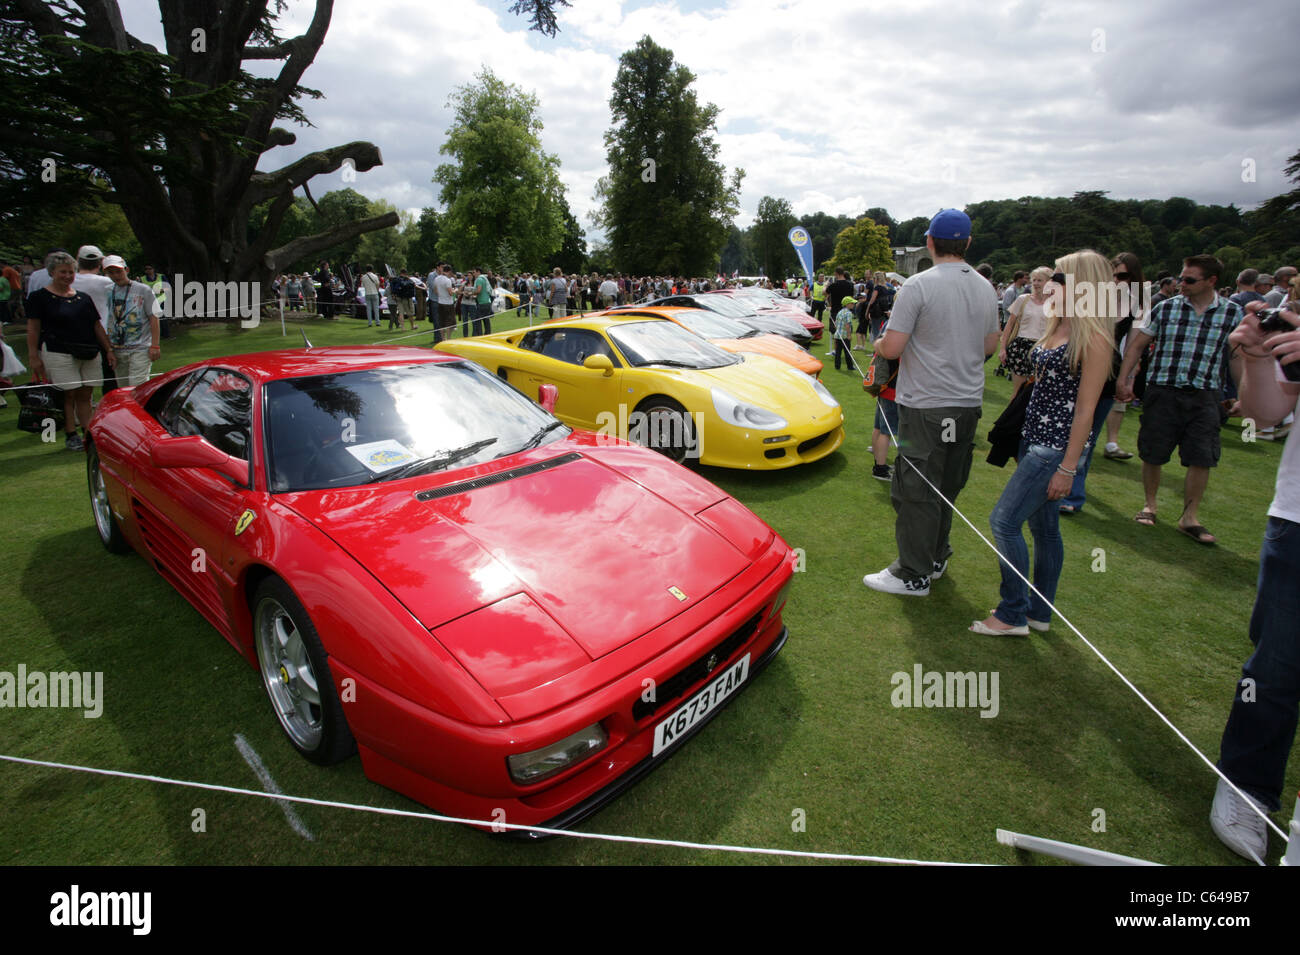 A red Ferrari among other cars at Classic car show at Wilton House, Wiltshire. Stock Photo